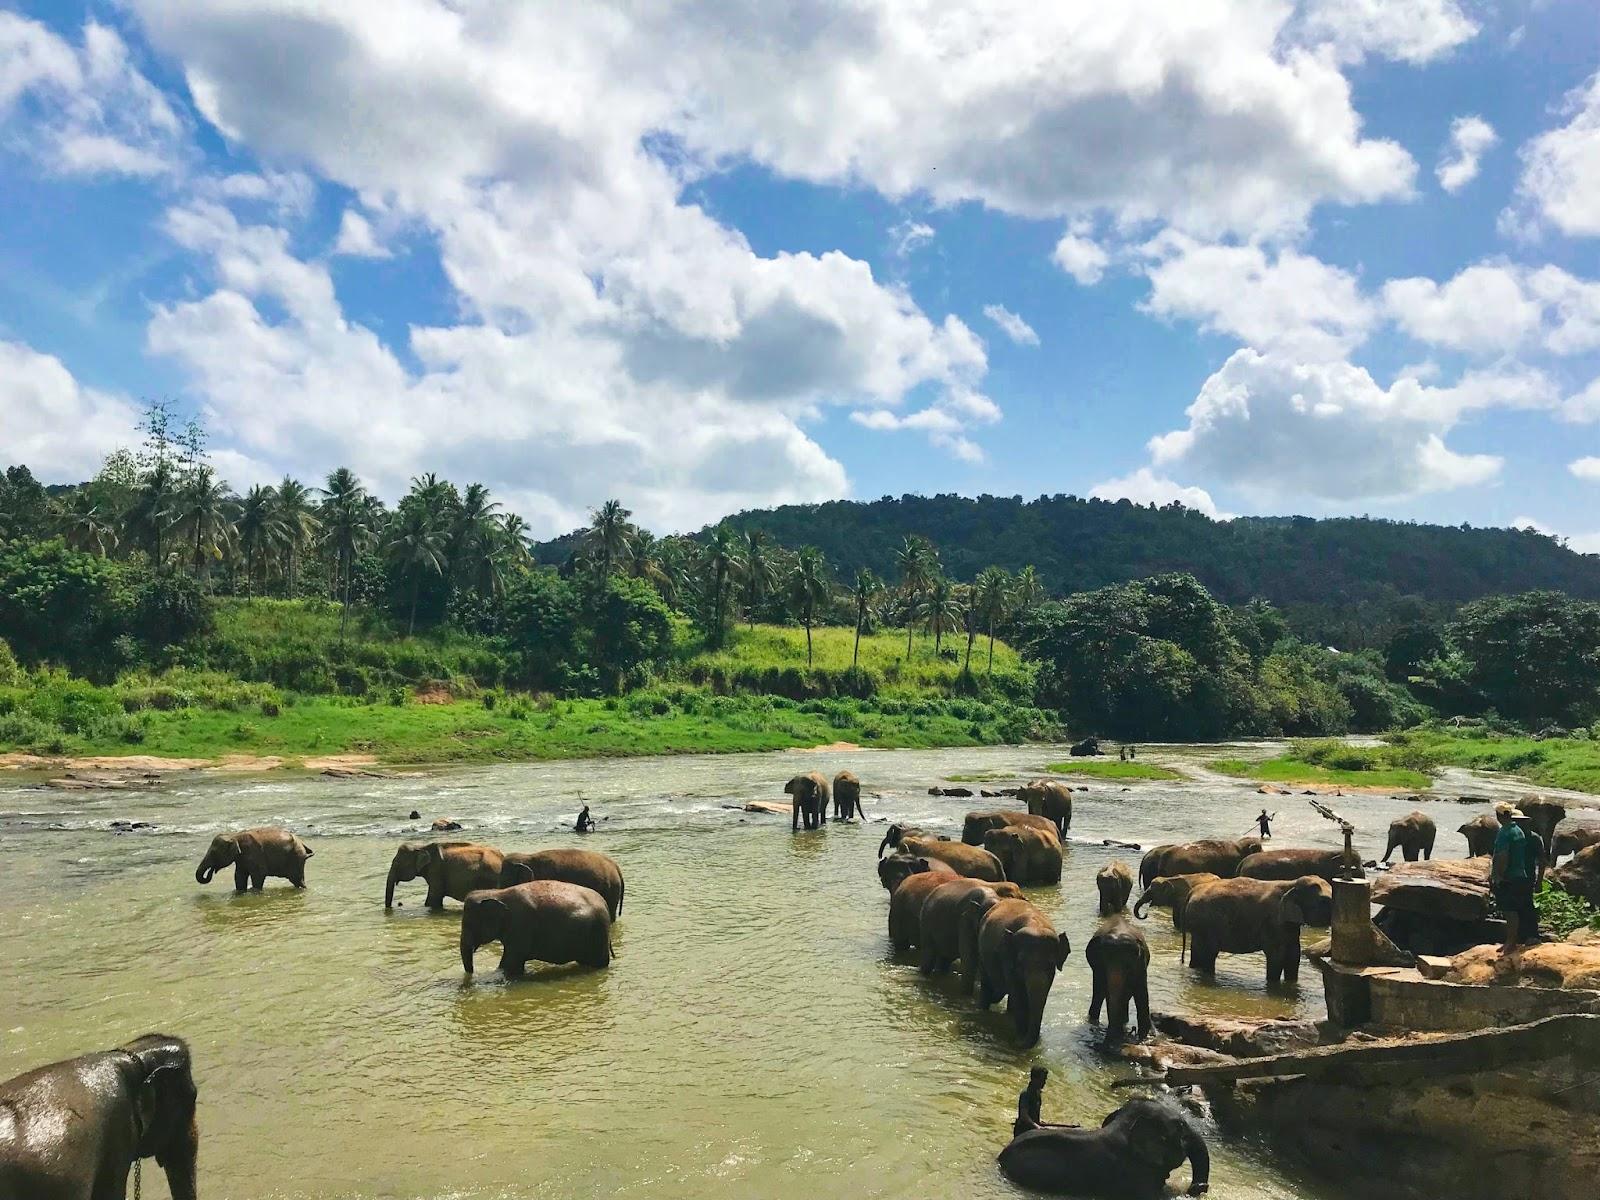 Elephants bathing in the river at Yala National Park